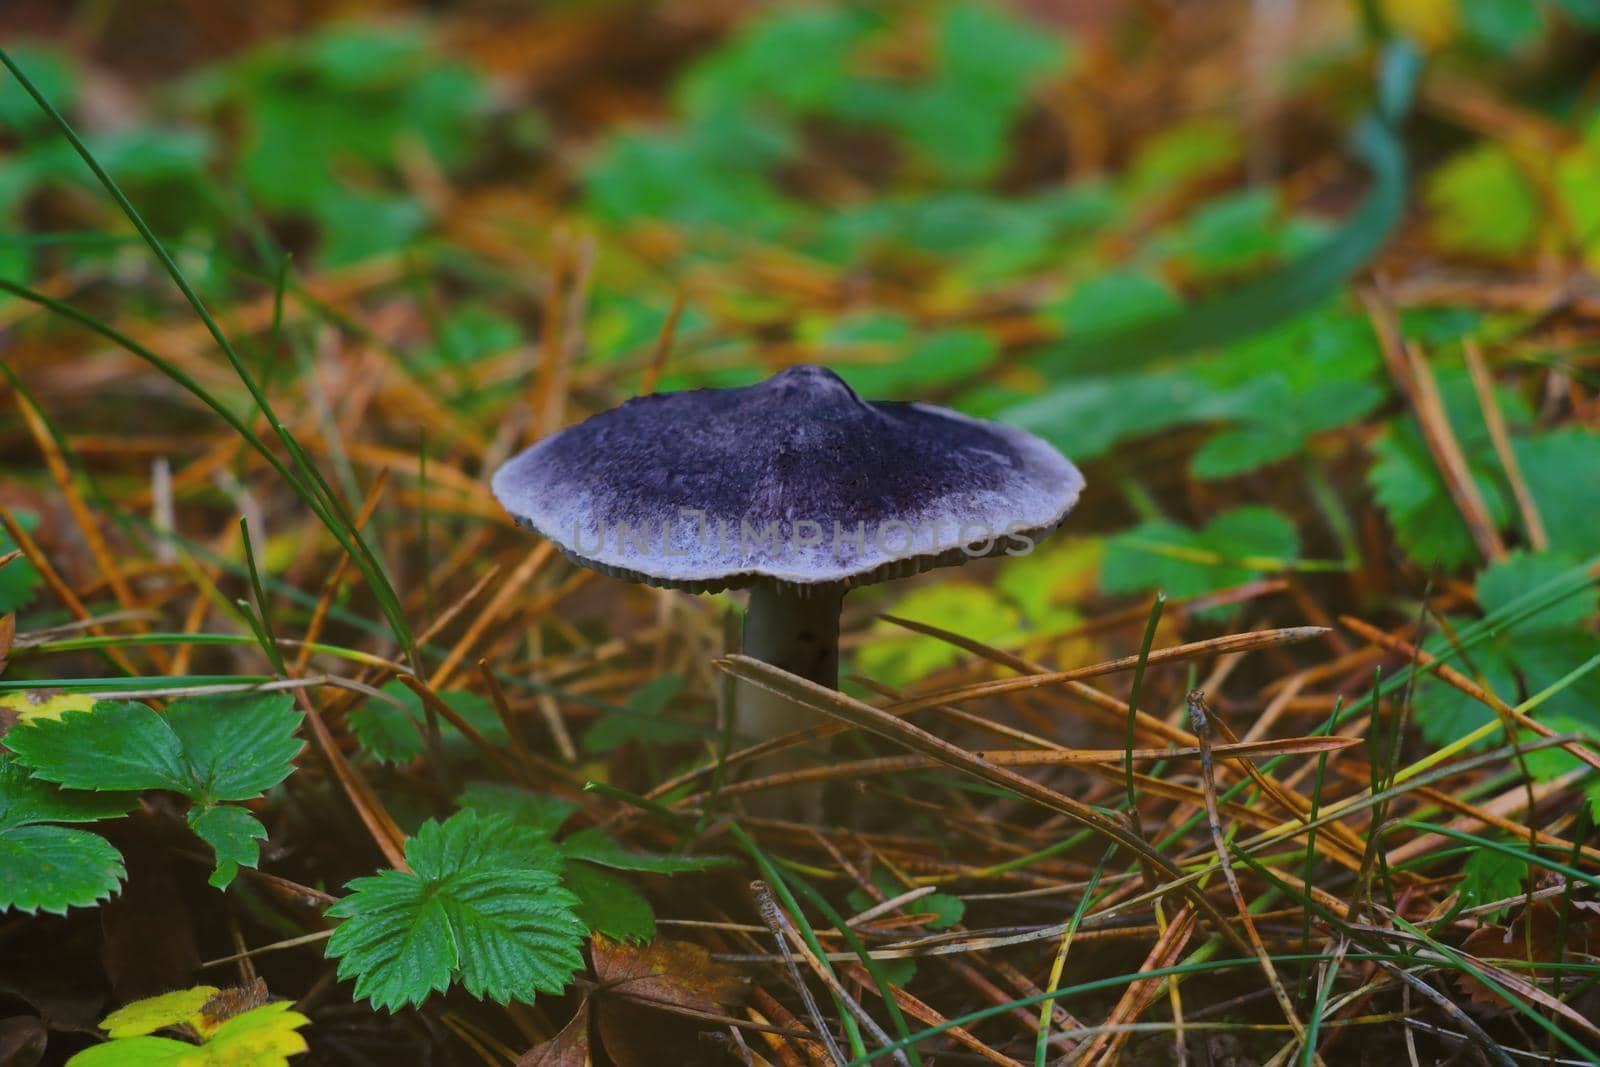 The gray mushroom grows in a clearing in the autumn in the forest